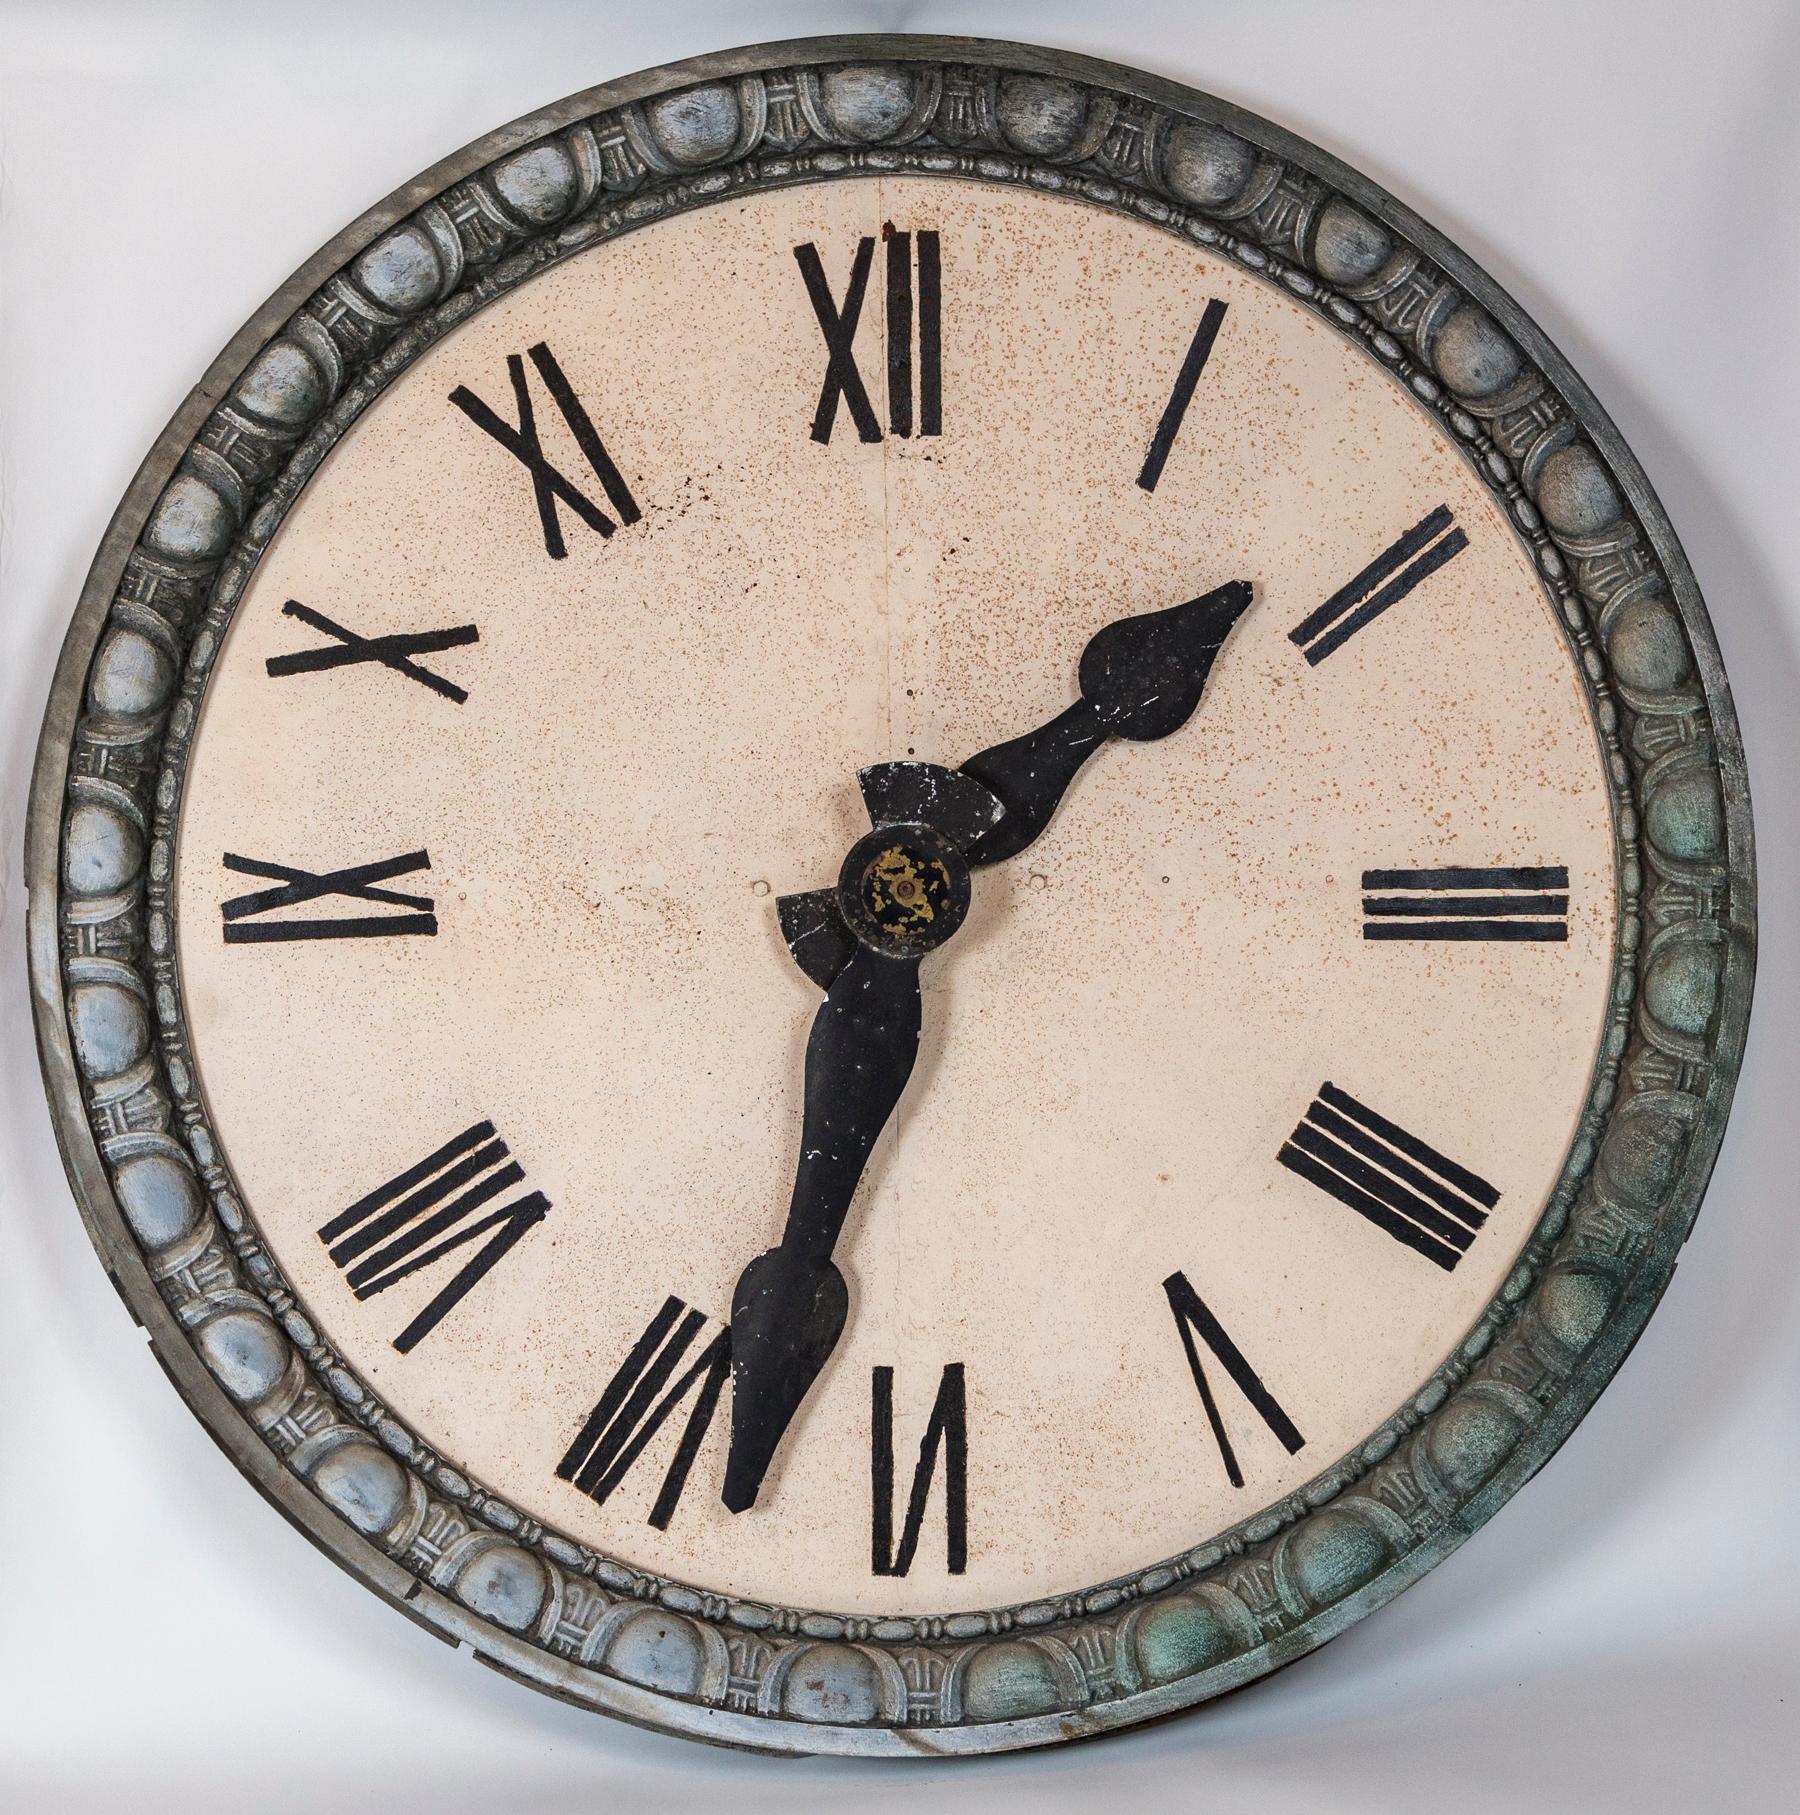 Architectural clock face, France, circa 1900. Striking zinc clock face with unusual detailed border. Original hands. Face and numbers most probably repainted over the years.